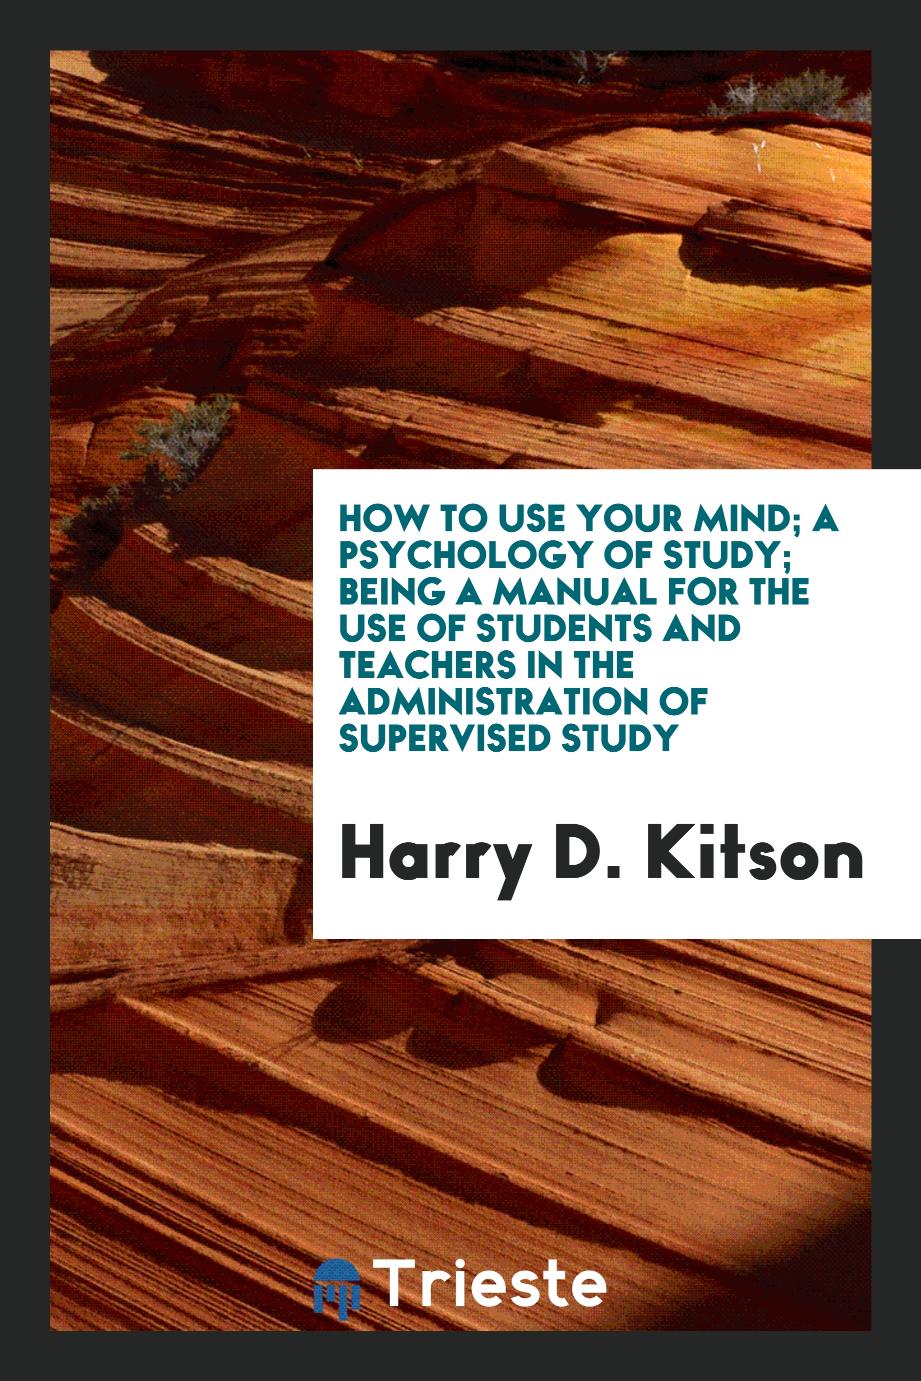 How to use your mind; a psychology of study; being a manual for the use of students and teachers in the administration of supervised study